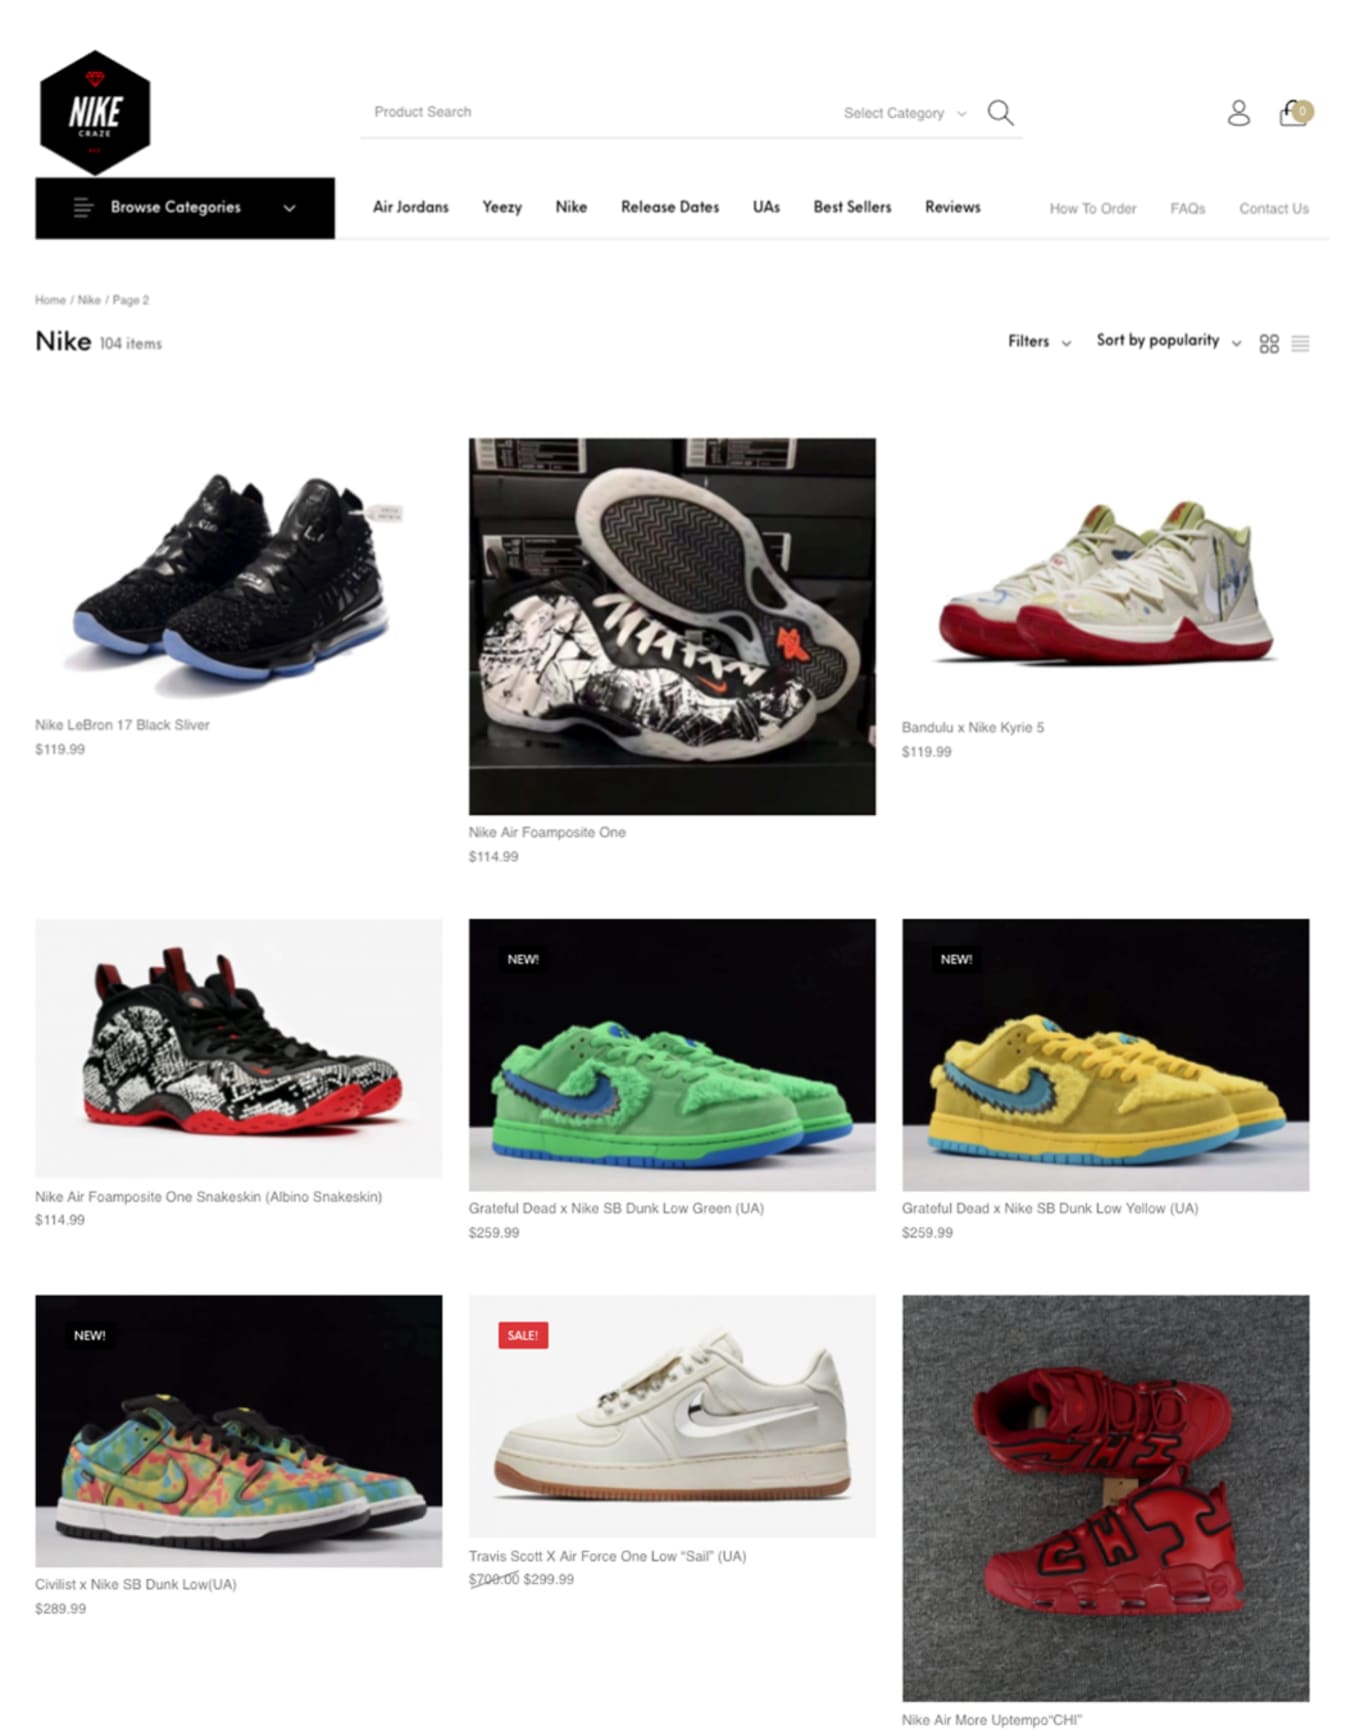 Nike Sues Nearly 600 Websites for 